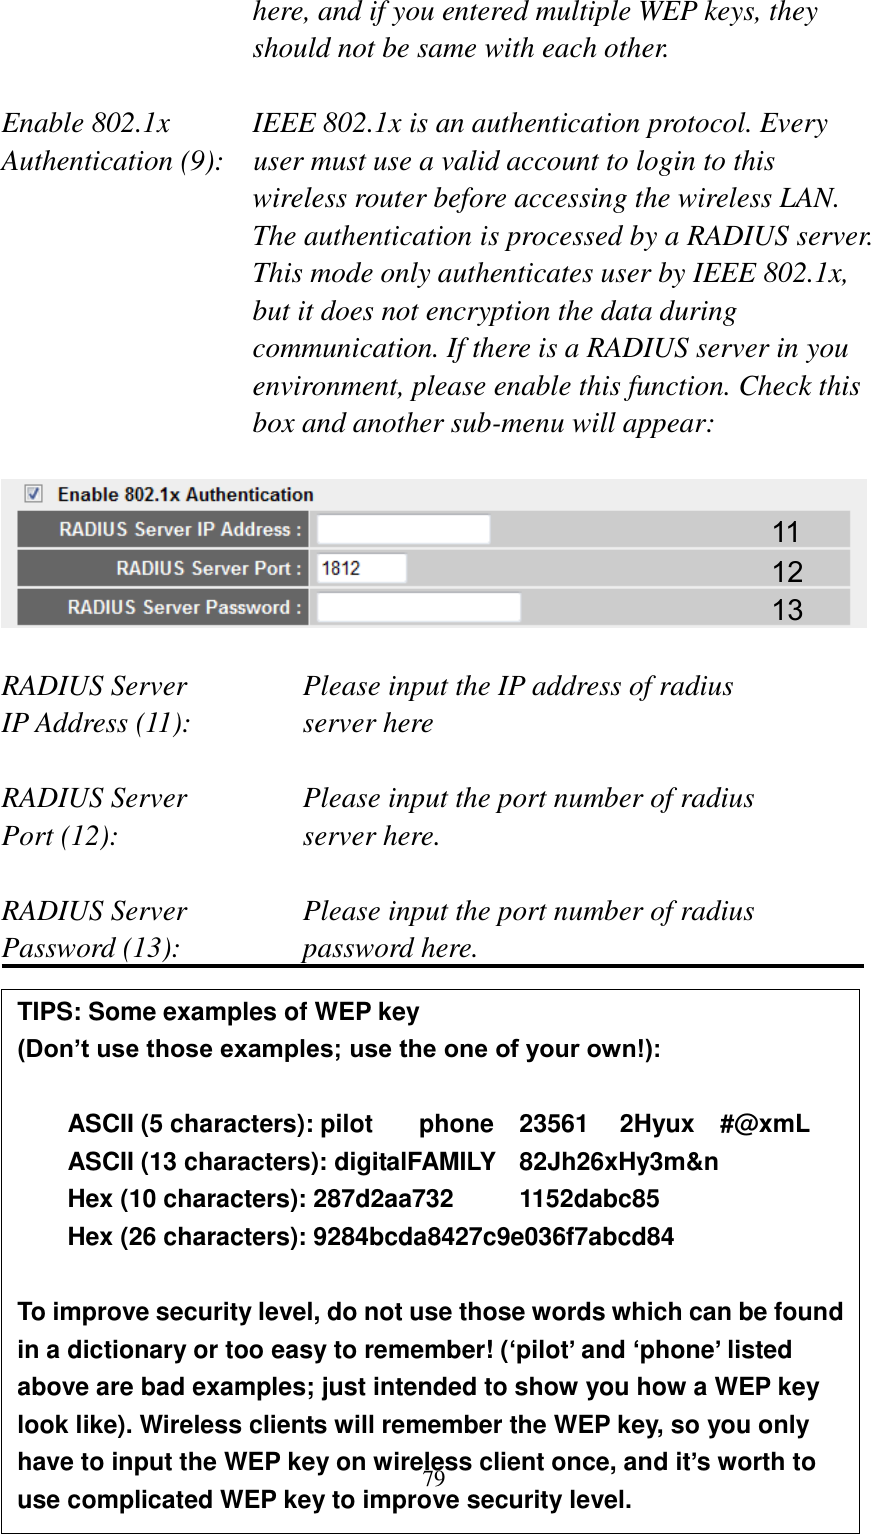 79 here, and if you entered multiple WEP keys, they should not be same with each other.  Enable 802.1x  IEEE 802.1x is an authentication protocol. Every   Authentication (9):    user must use a valid account to login to this wireless router before accessing the wireless LAN. The authentication is processed by a RADIUS server. This mode only authenticates user by IEEE 802.1x, but it does not encryption the data during communication. If there is a RADIUS server in you environment, please enable this function. Check this box and another sub-menu will appear:    RADIUS Server      Please input the IP address of radius   IP Address (11):     server here  RADIUS Server      Please input the port number of radius Port (12):        server here.  RADIUS Server      Please input the port number of radius Password (13):      password here.             11 12 13 TIPS: Some examples of WEP key   (Don’t use those examples; use the one of your own!):  ASCII (5 characters): pilot    phone    23561    2Hyux    #@xmL ASCII (13 characters): digitalFAMILY   82Jh26xHy3m&amp;n Hex (10 characters): 287d2aa732    1152dabc85 Hex (26 characters): 9284bcda8427c9e036f7abcd84  To improve security level, do not use those words which can be found in a dictionary or too easy to remember! (‘pilot’ and ‘phone’ listed above are bad examples; just intended to show you how a WEP key look like). Wireless clients will remember the WEP key, so you only have to input the WEP key on wireless client once, and it’s worth to use complicated WEP key to improve security level. 